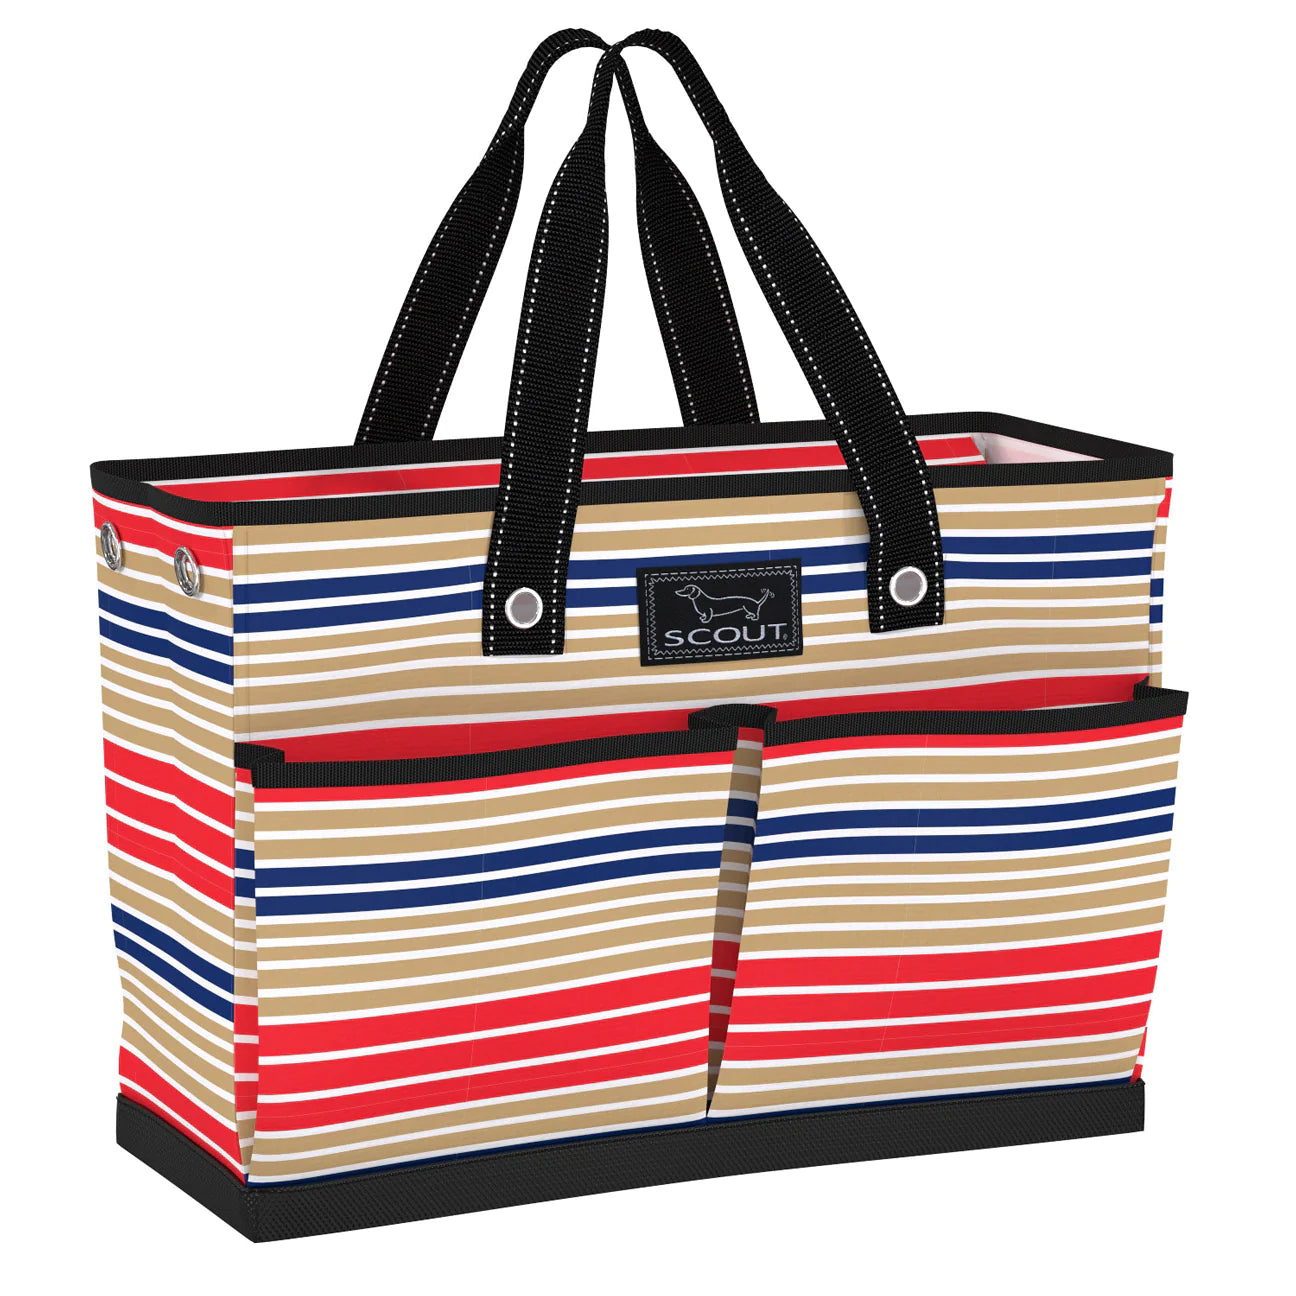 Large Utility Tote Bag with Structured Bottom Stripes